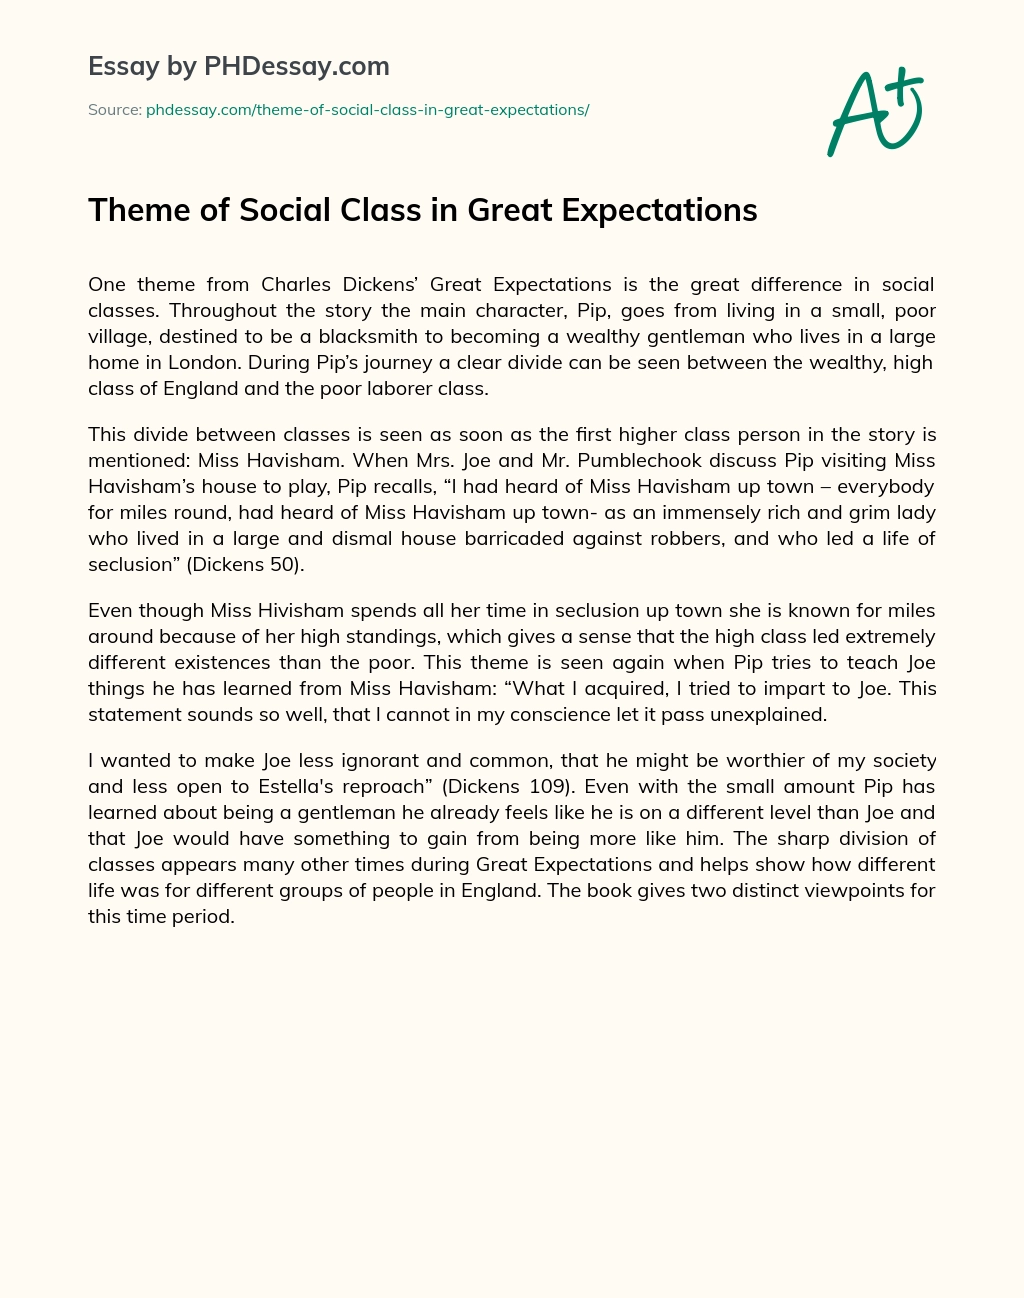 Theme of Social Class in Great Expectations essay